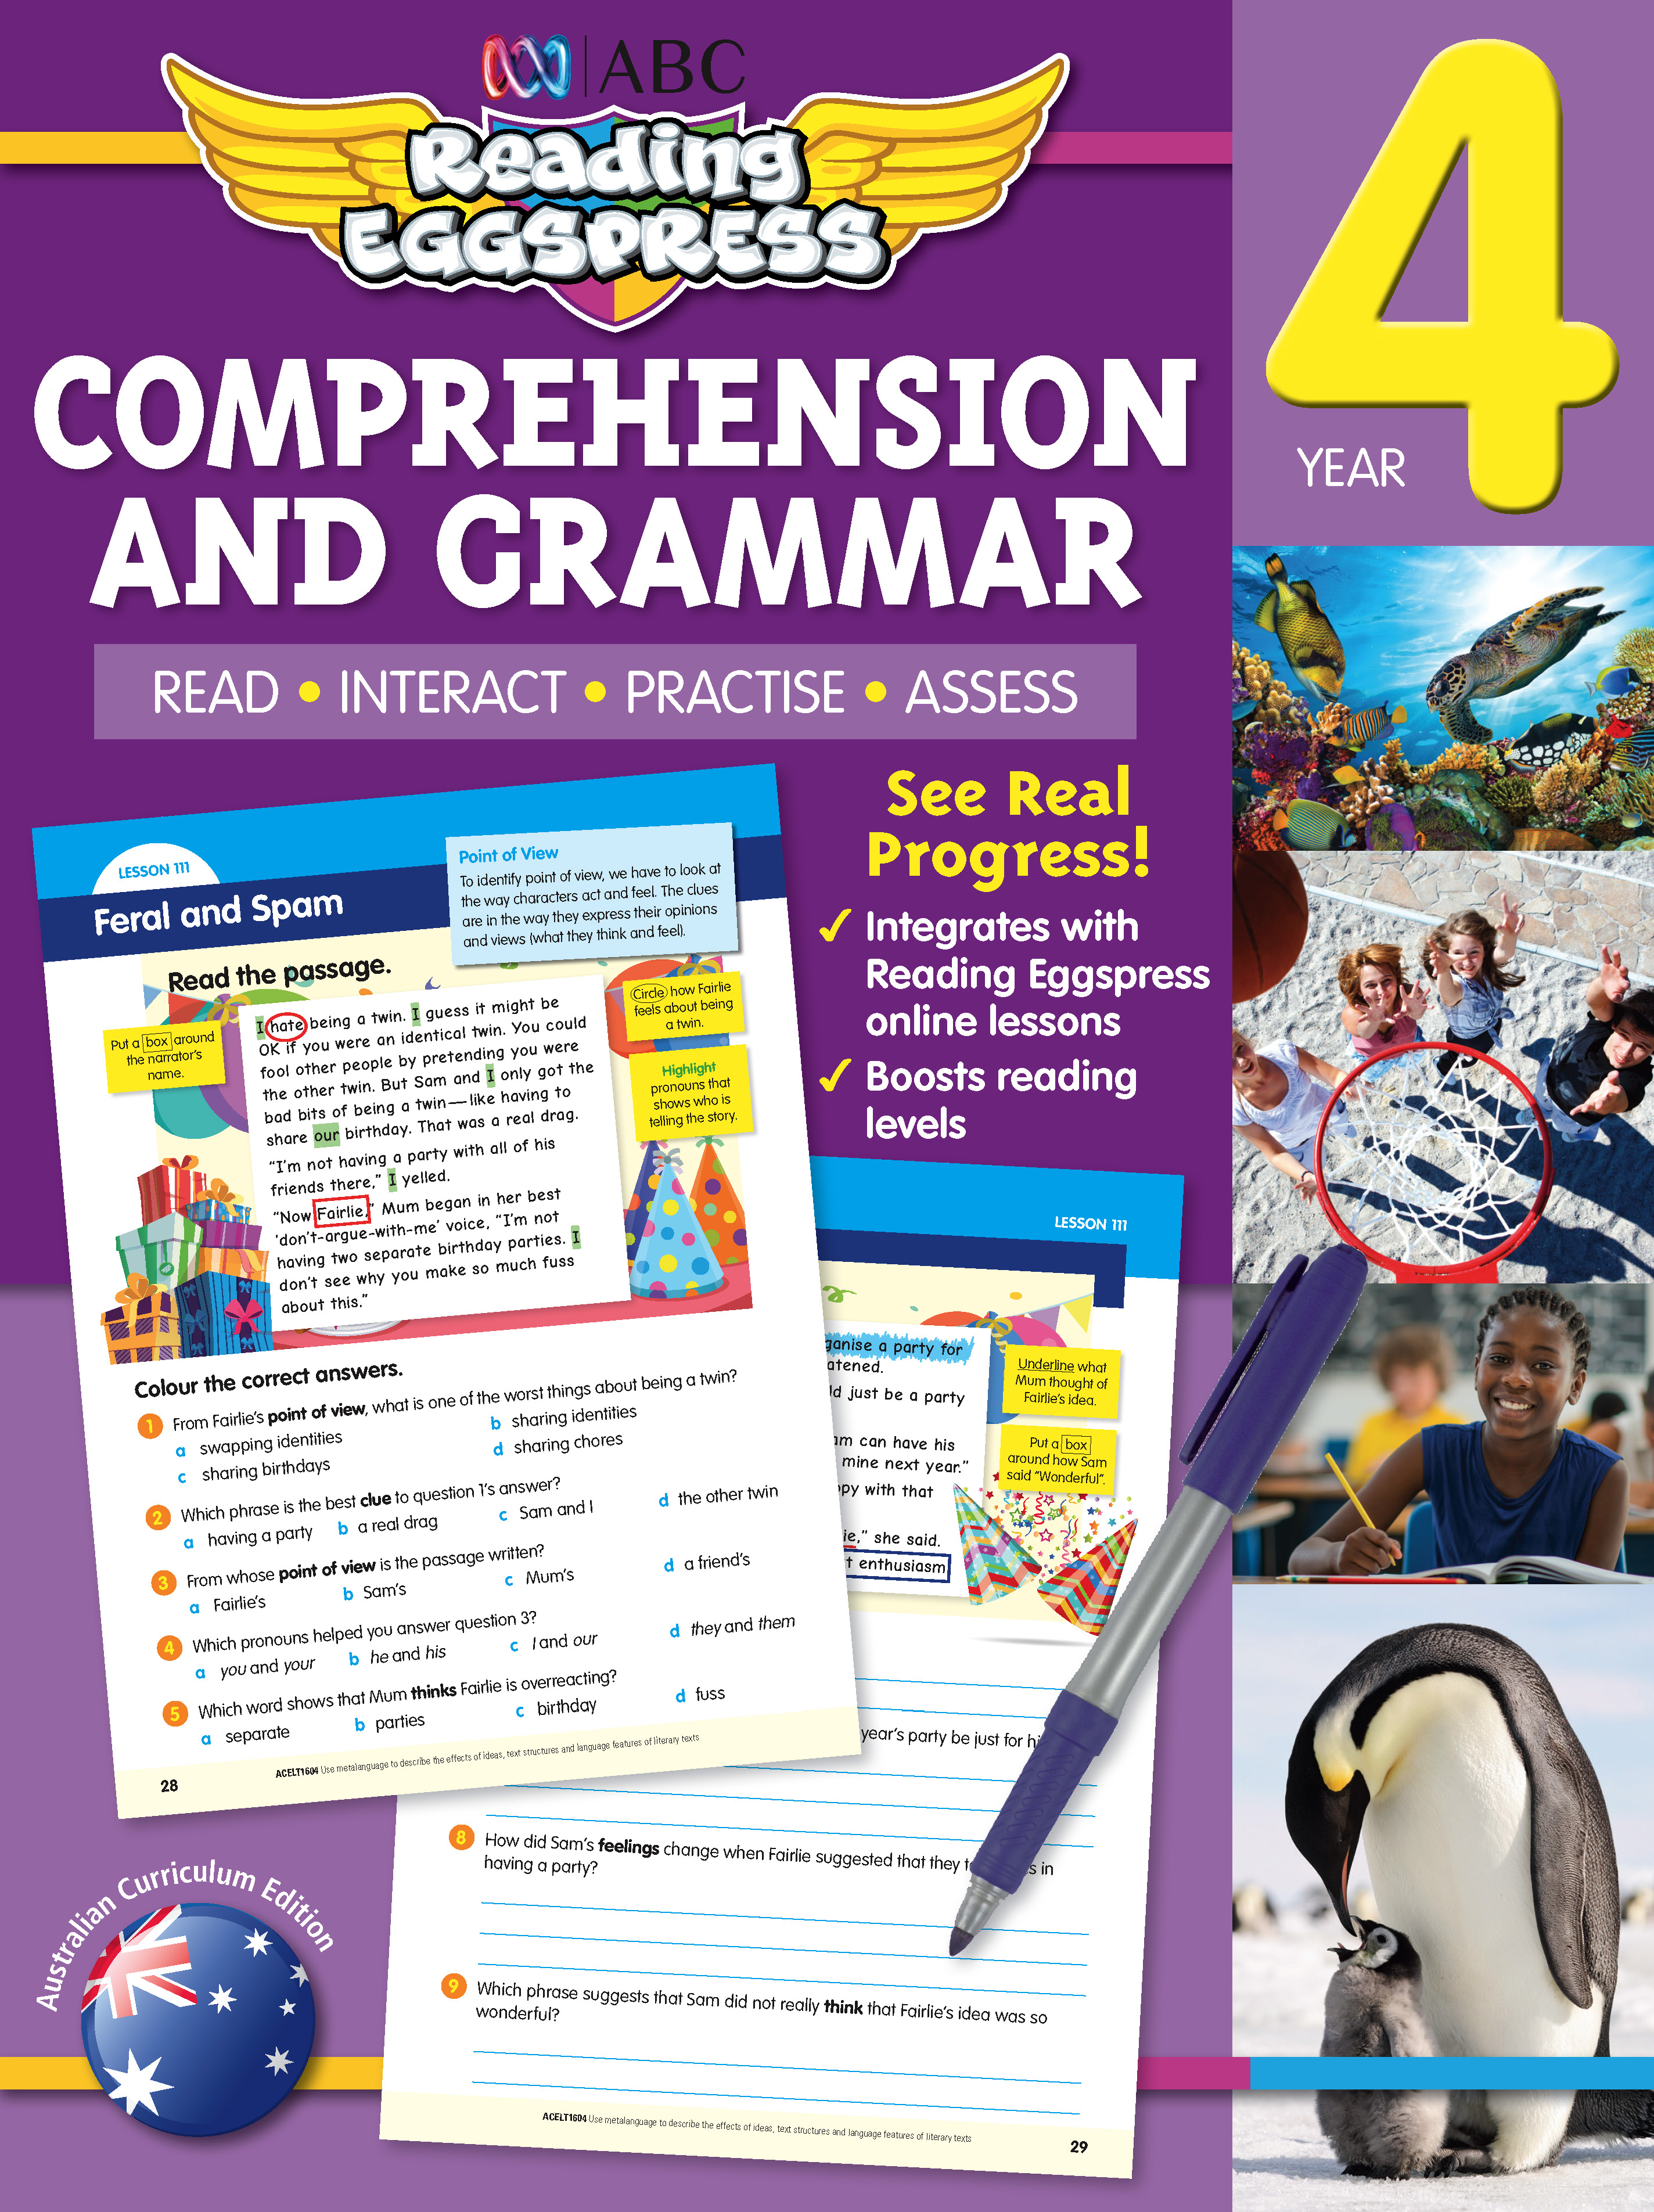 Picture of ABC Reading Eggspress Comprehension and Grammar Workbook Year 4